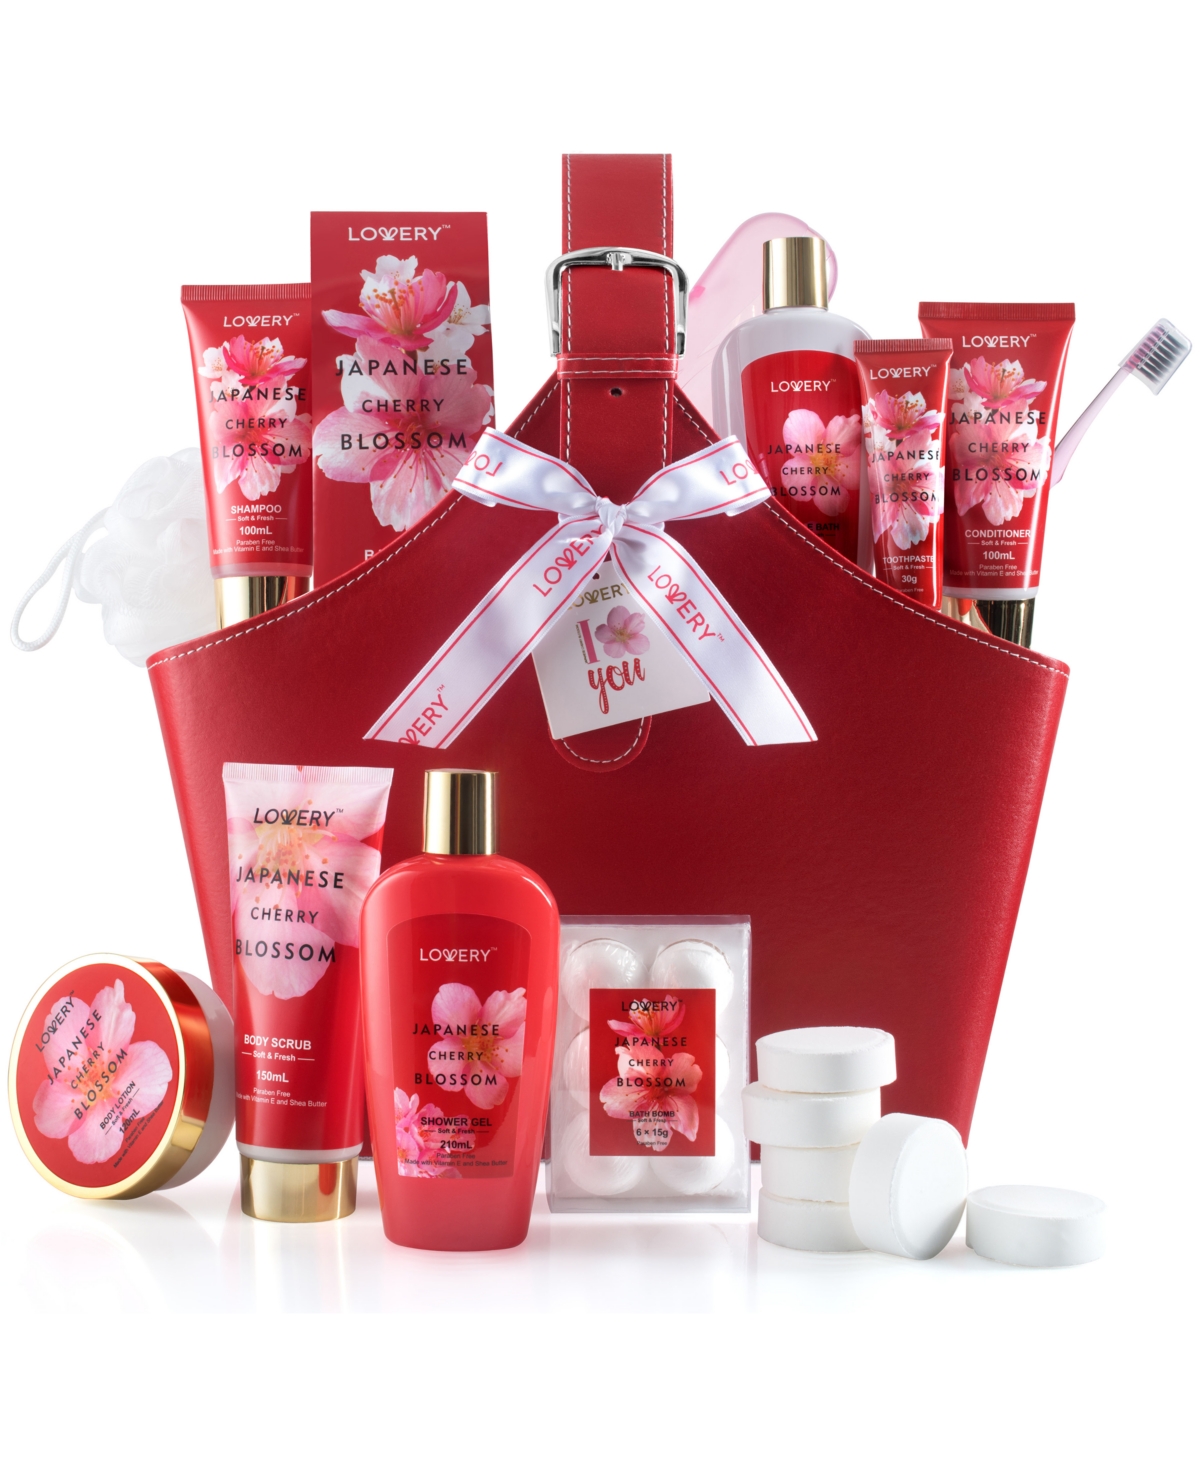 Body Care Gift Set, Japanese Cherry Blossom Home Spa Tote Bag Gift Set, 25 Piece